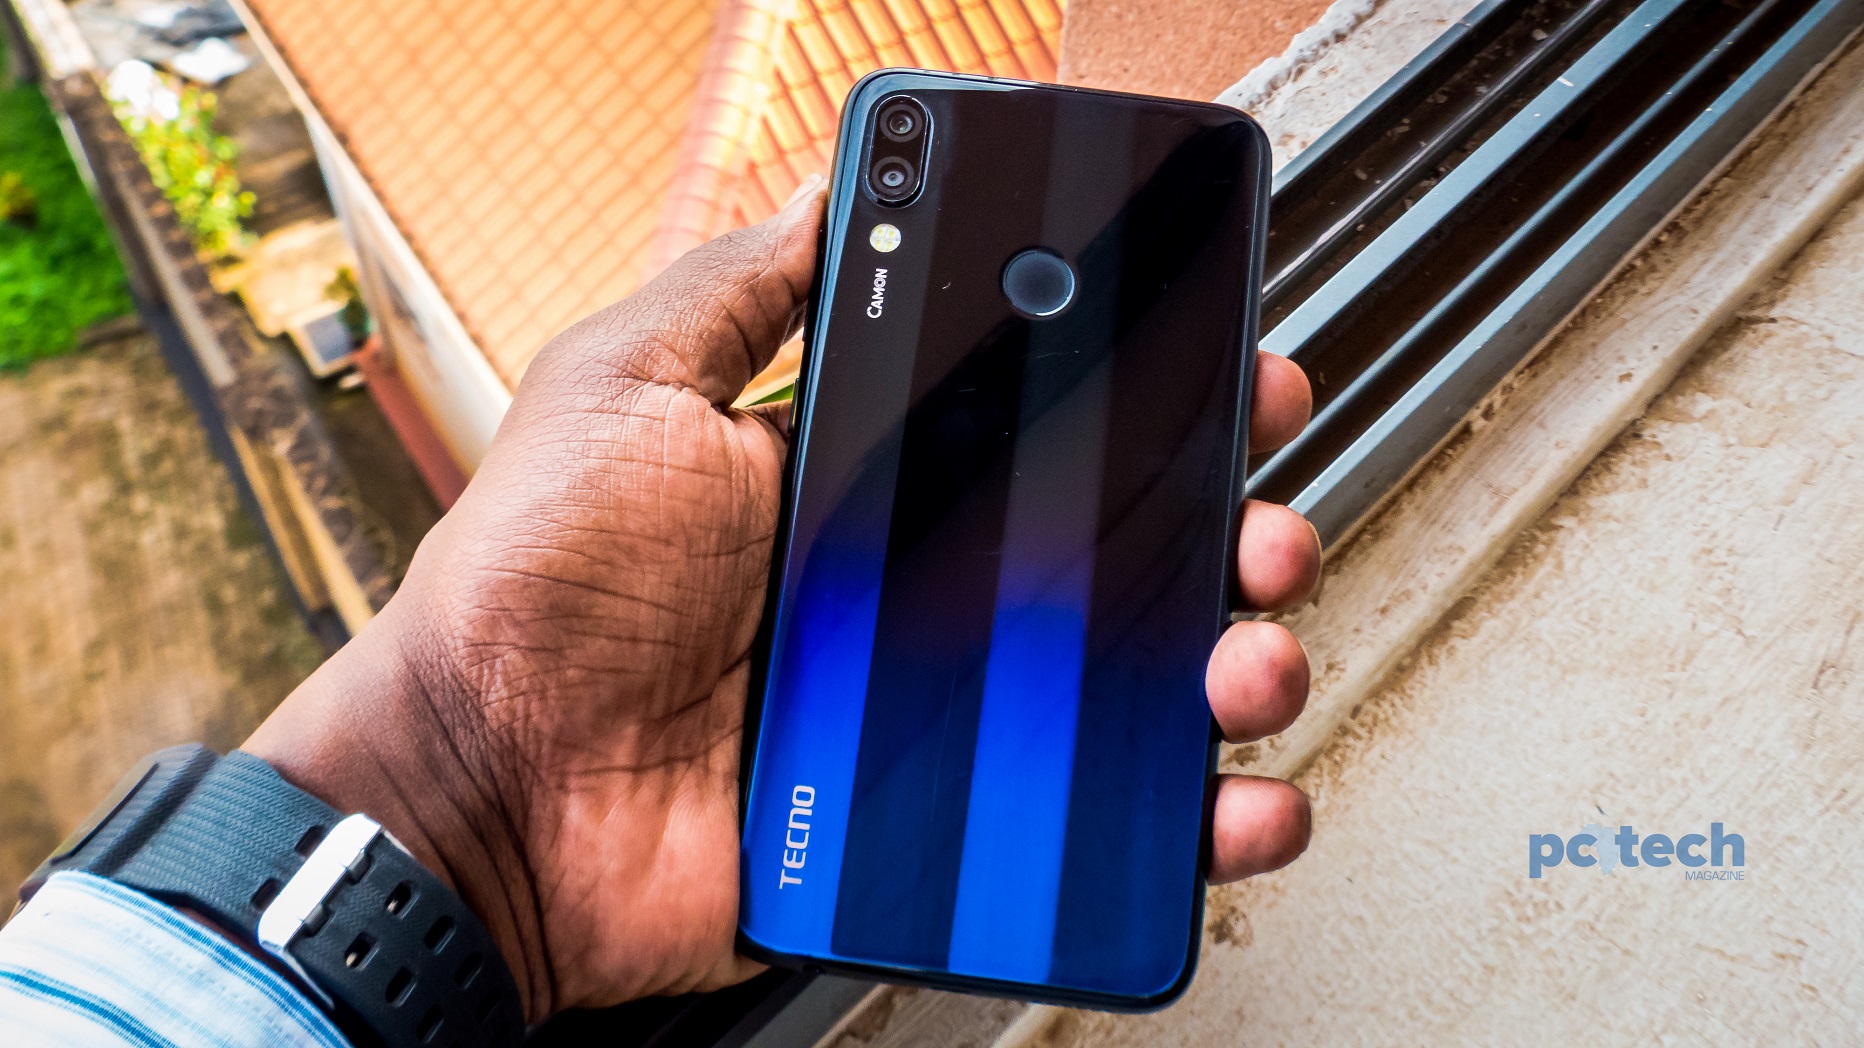 The Tecno Camon 11 Pro is created for customers who follow the latest technological trends and want to stand out.